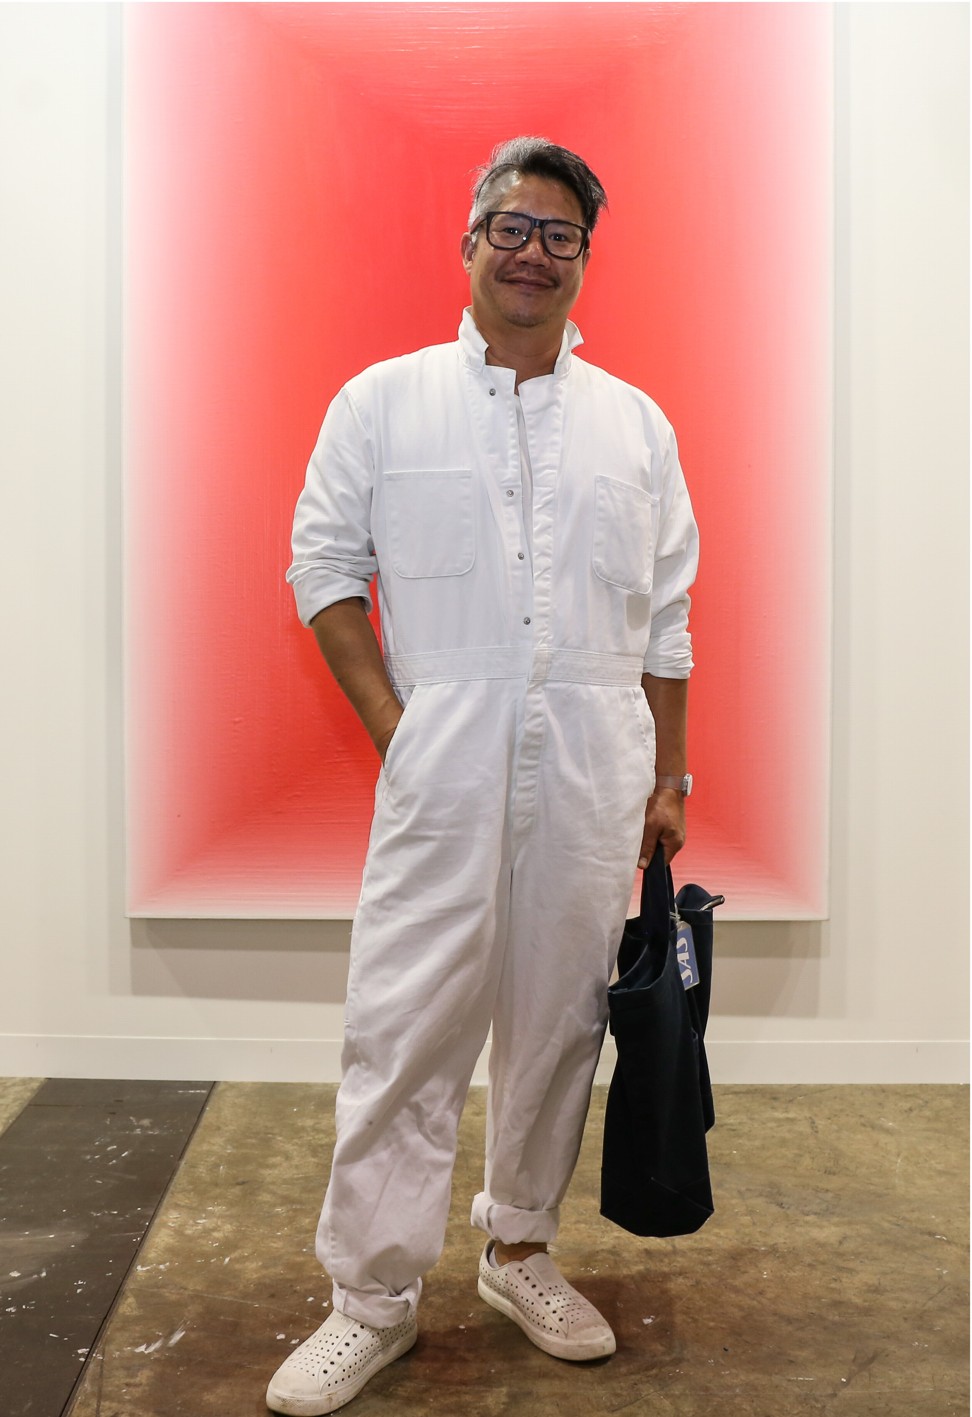 A visitor to Art Basel in a white boiler suit. Photo: Rachel Cheung